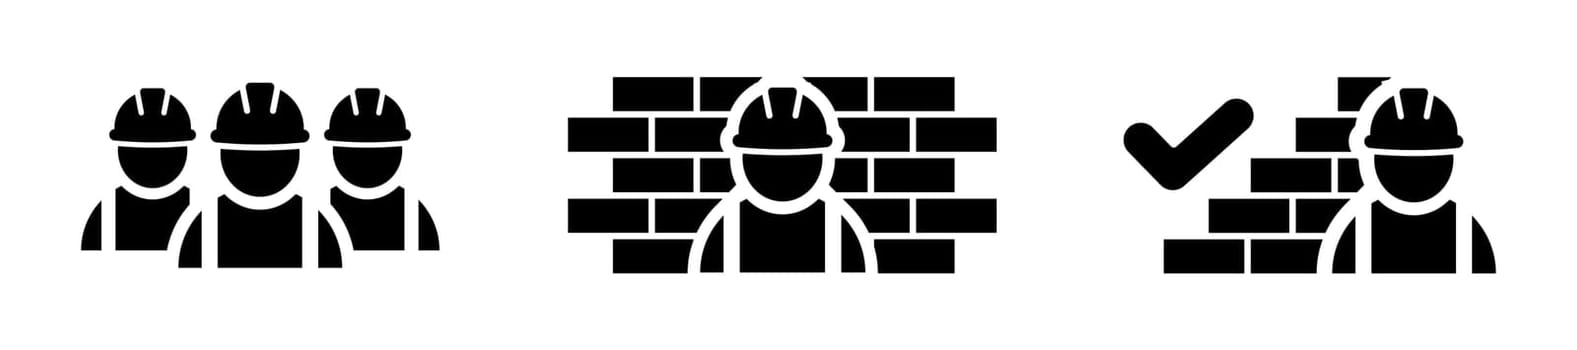 Good job of construction workers icon set in black